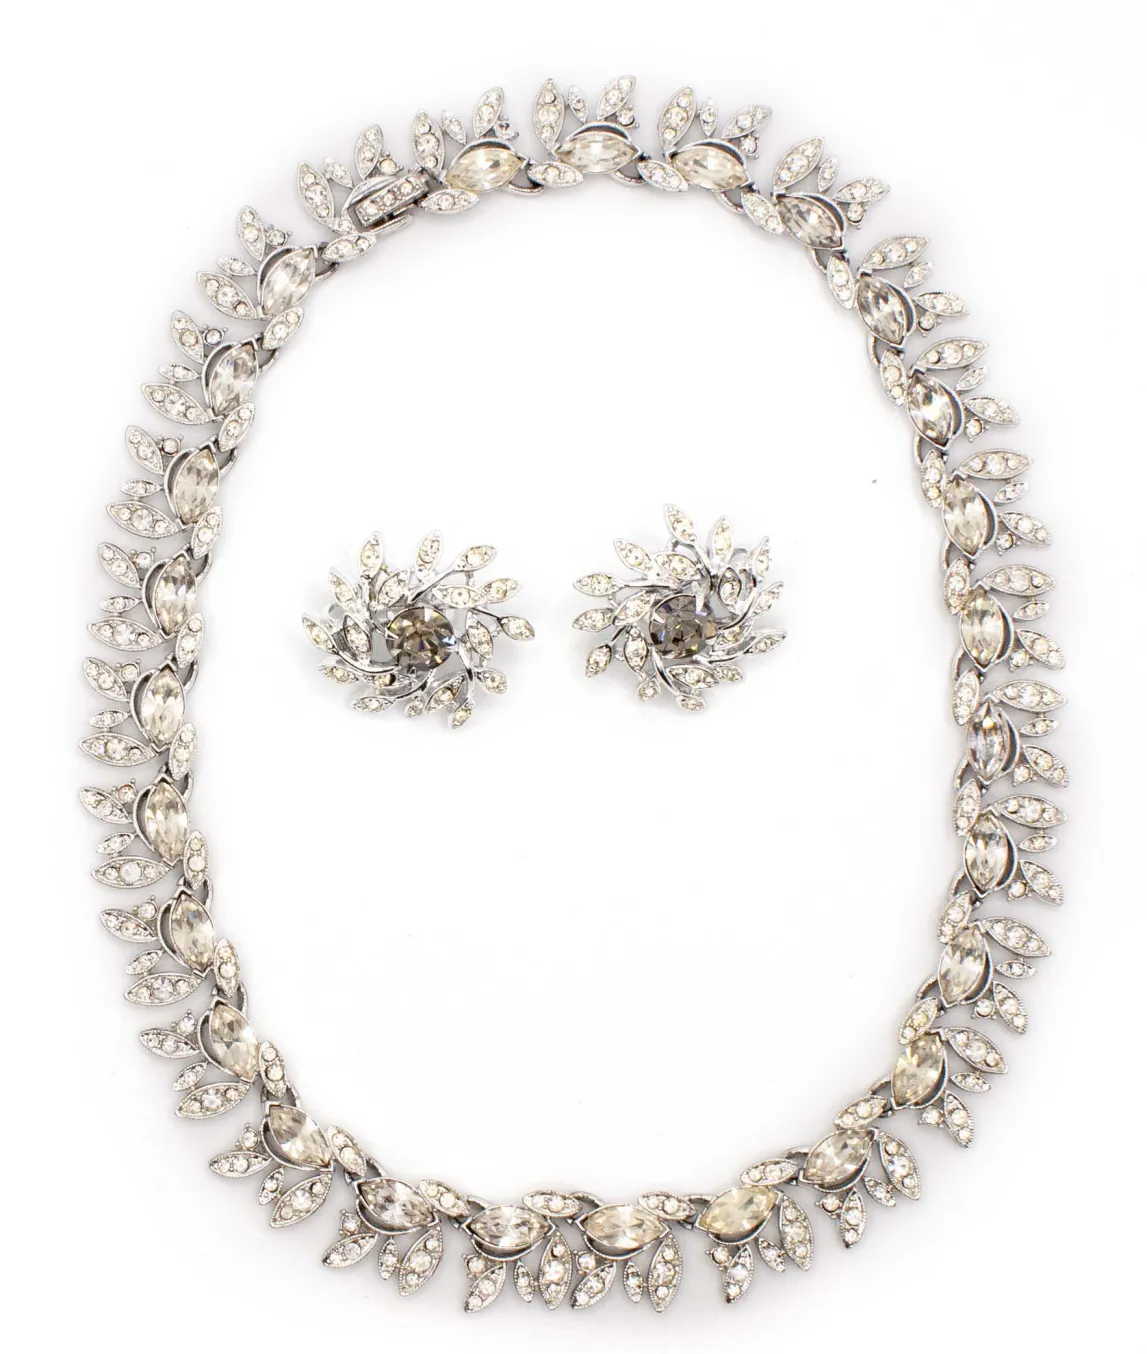 Weiss crystal set earrings and necklace